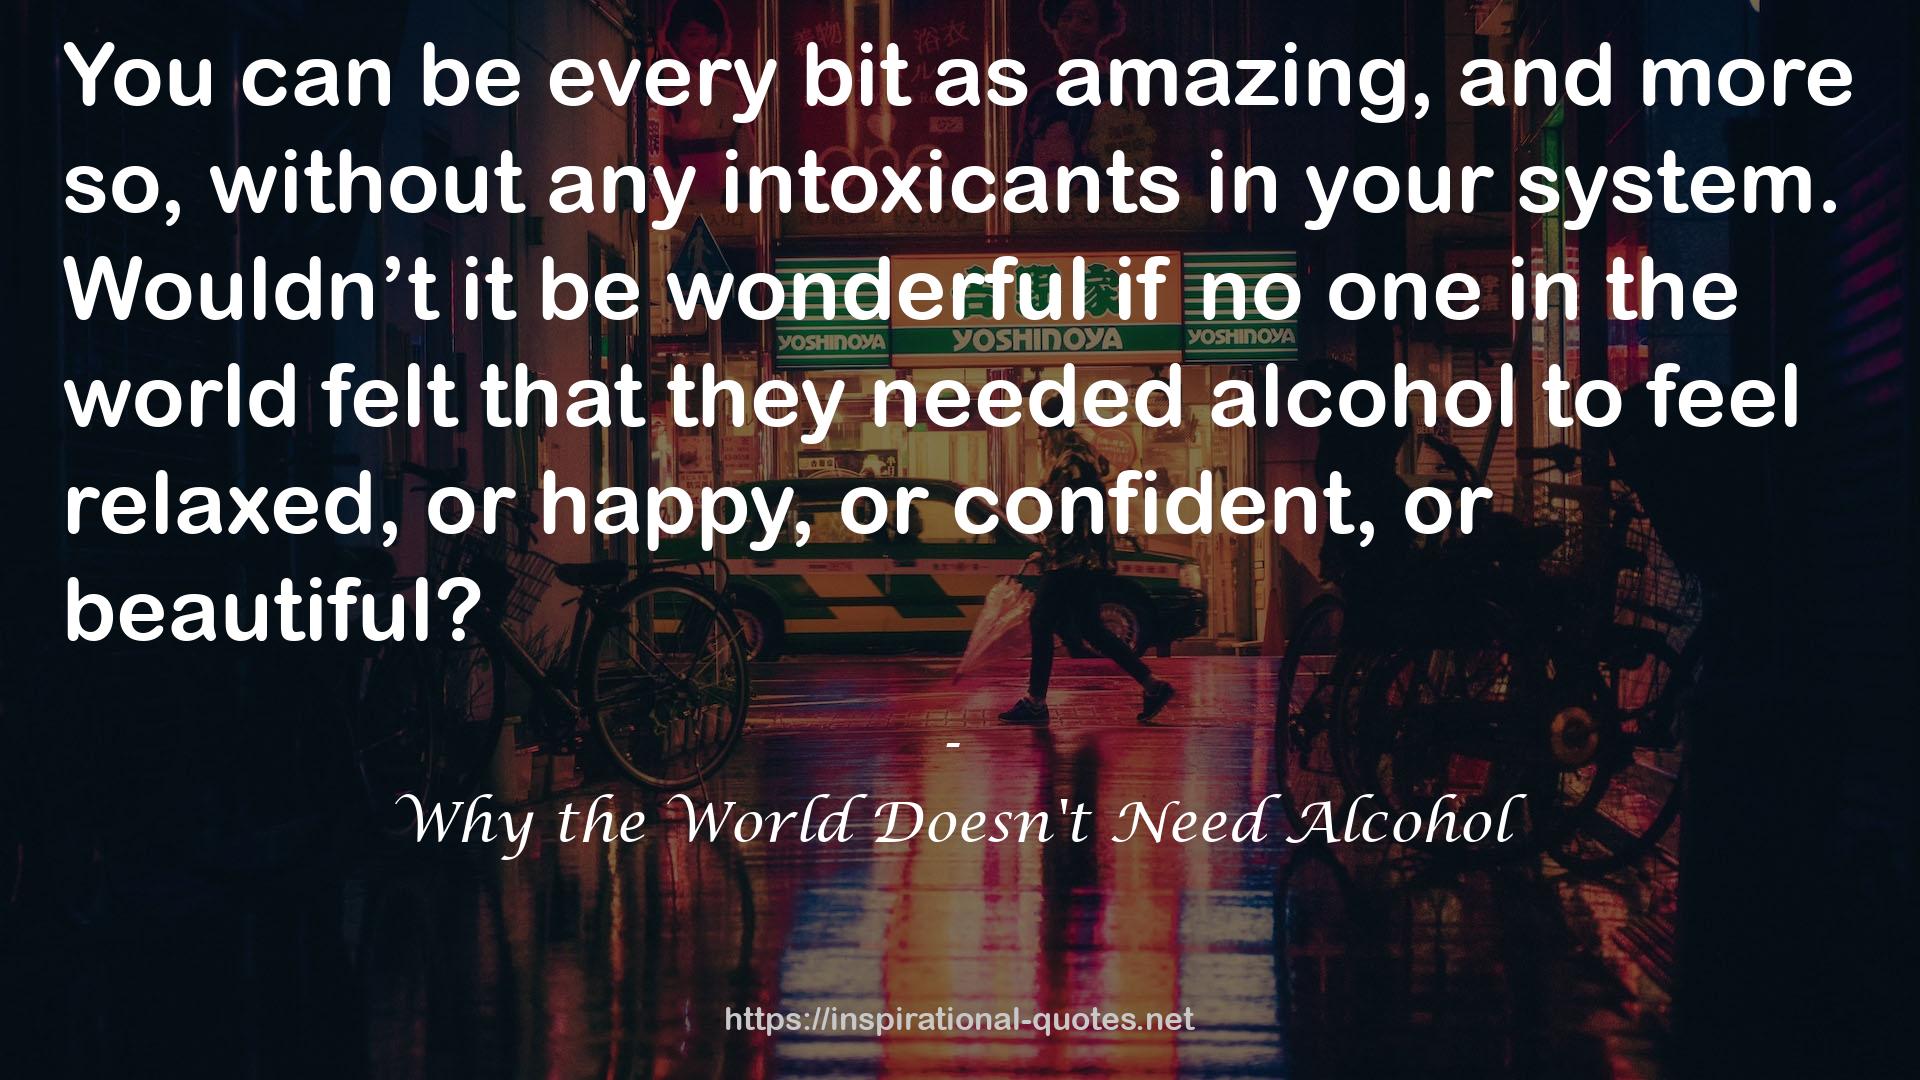 Why the World Doesn't Need Alcohol QUOTES